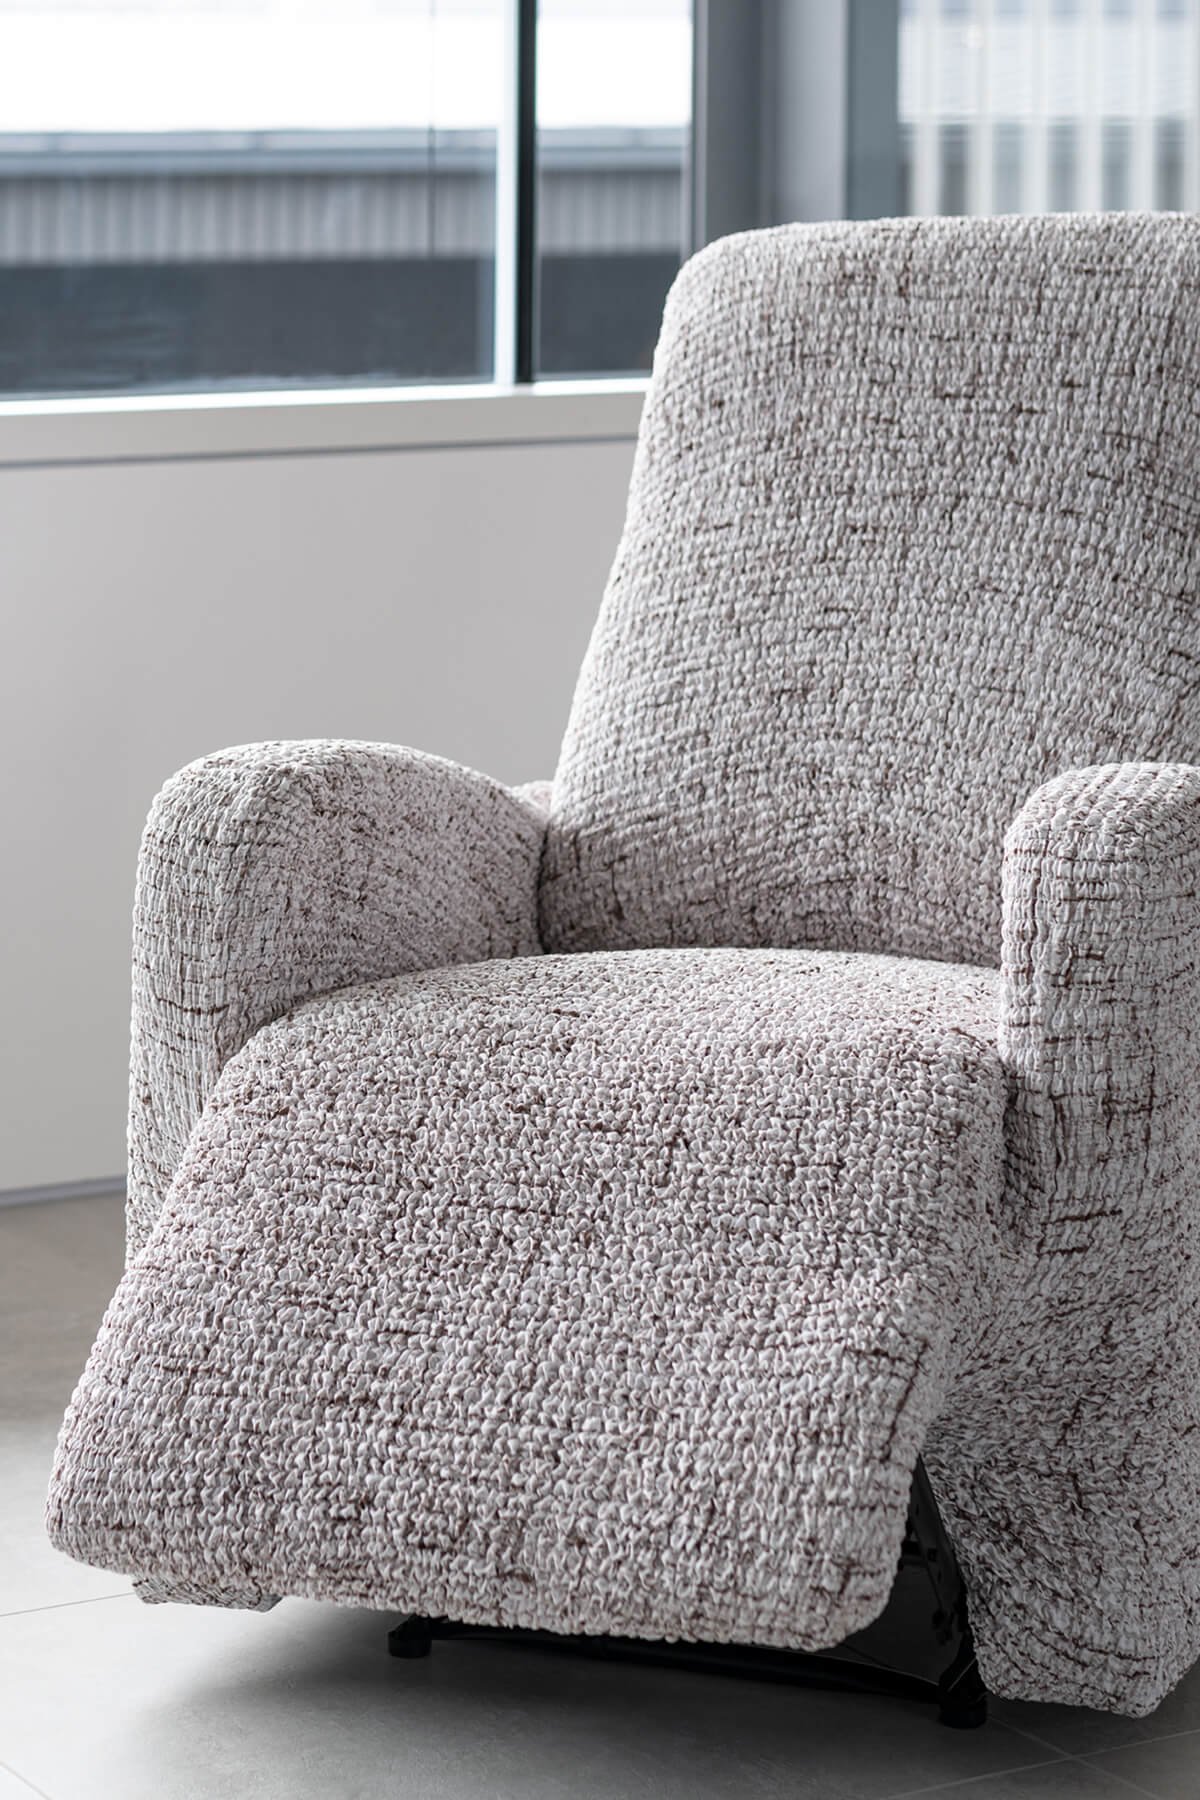 Recliner armchair covers